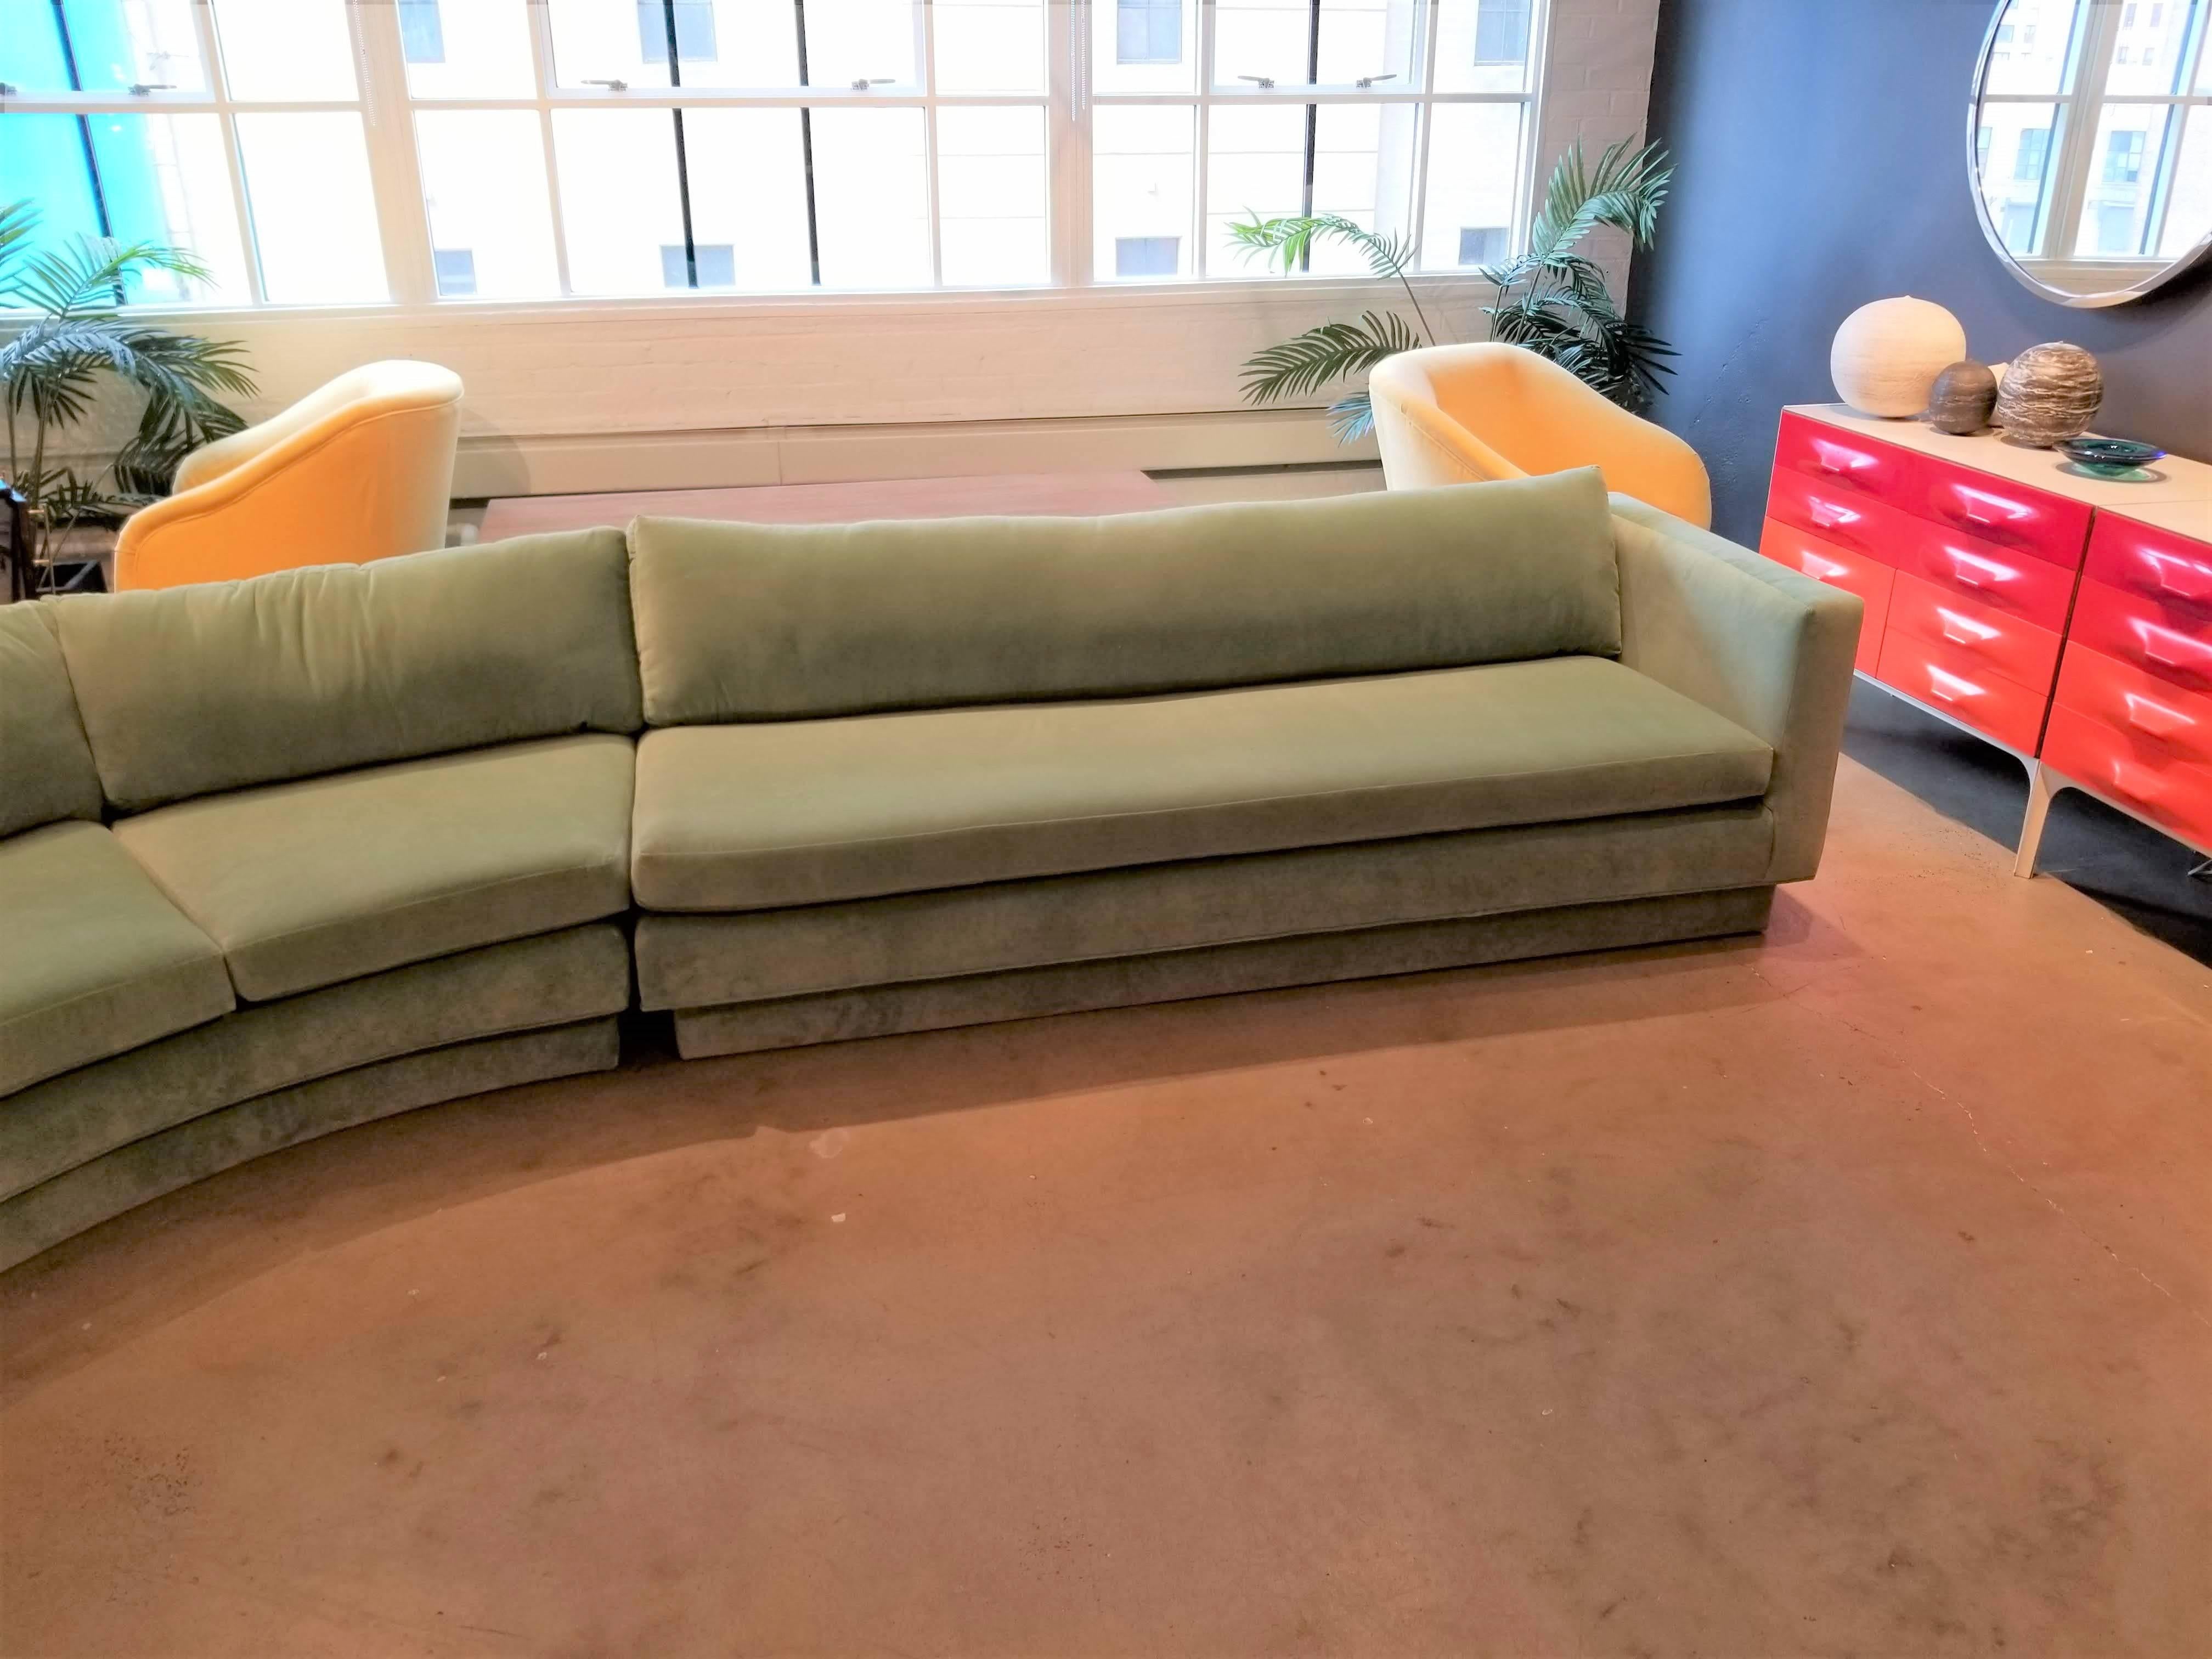 Mid-Century Modern Massive Curved Sofa by Directional Furniture Fully Restored in Celadon Velvet